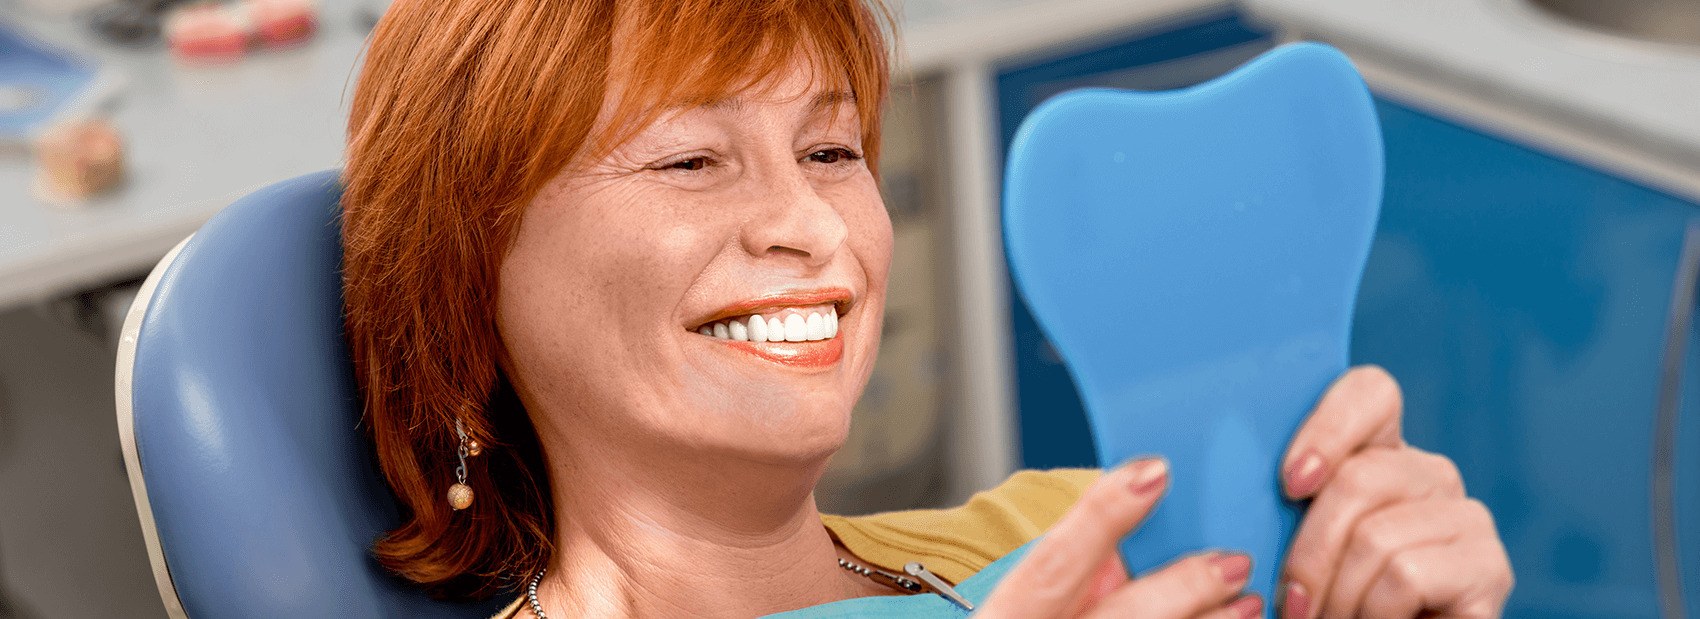 woman at the dentist smiling into a mirror